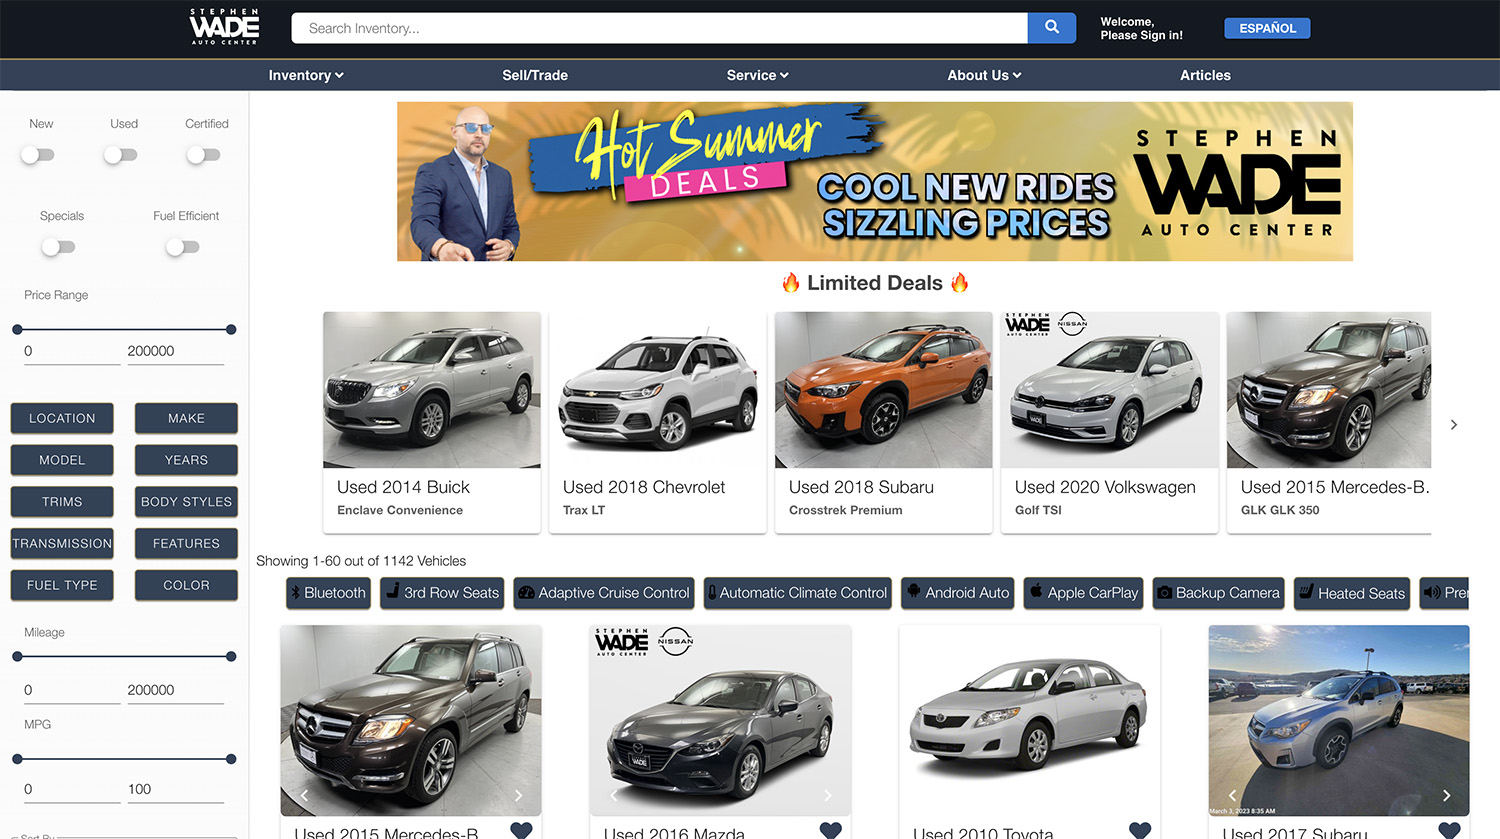 Cars.com vs Autotrader.com and Other Online Purchasing Options